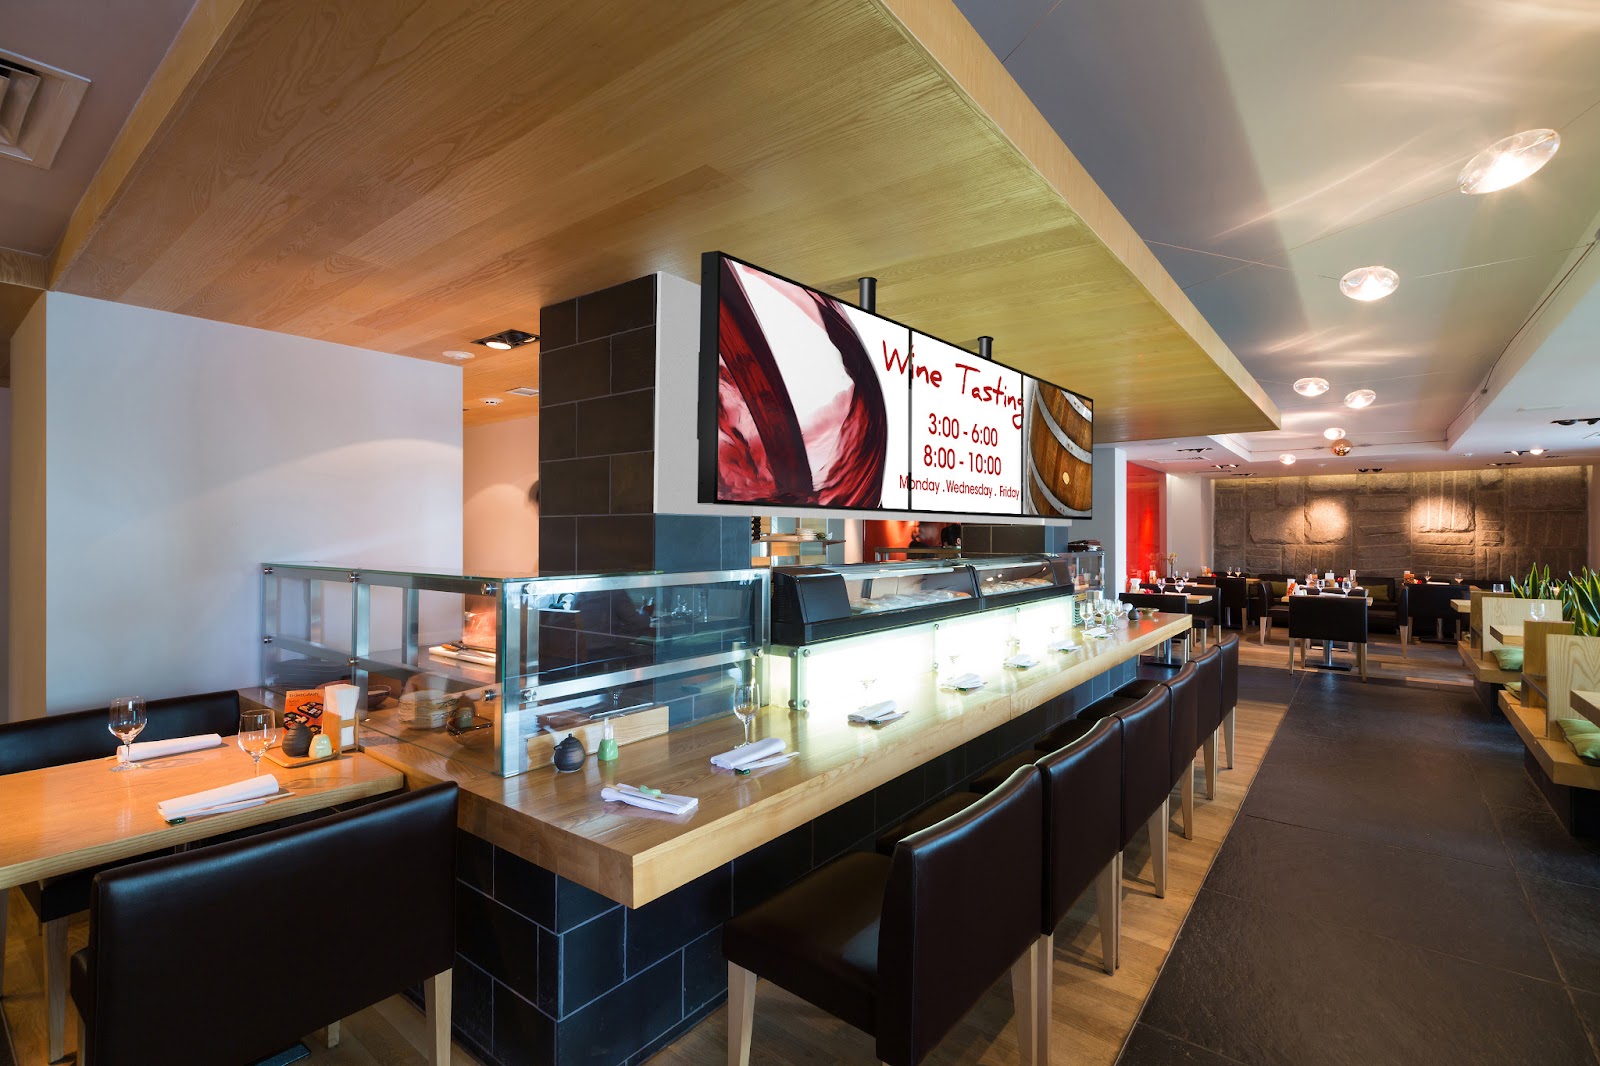 Switching from traditional printed menus to a digital signage content. Source: Modern Restaurant Management - Restaurant Digital Signage